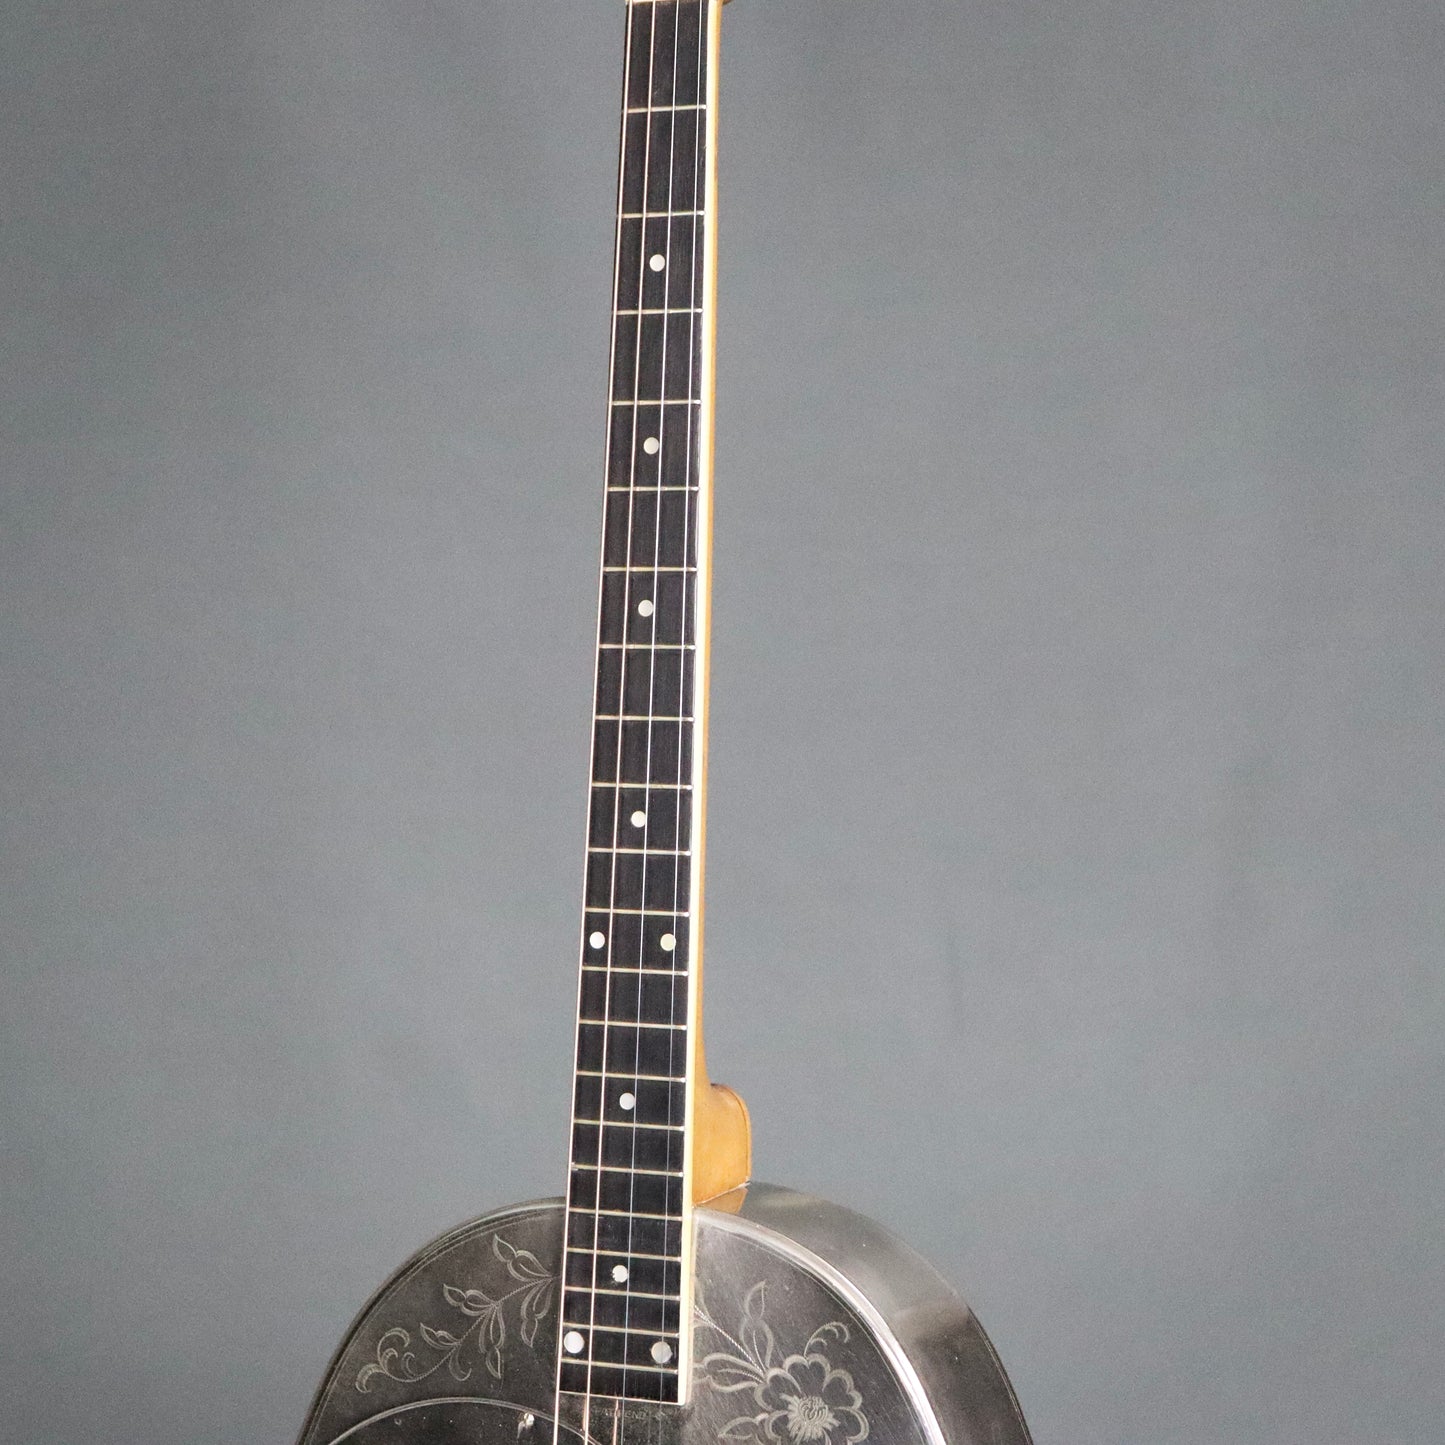 1929 National Style 2 Tricone Tenor Guitar Wild Rose Engraved Resonator